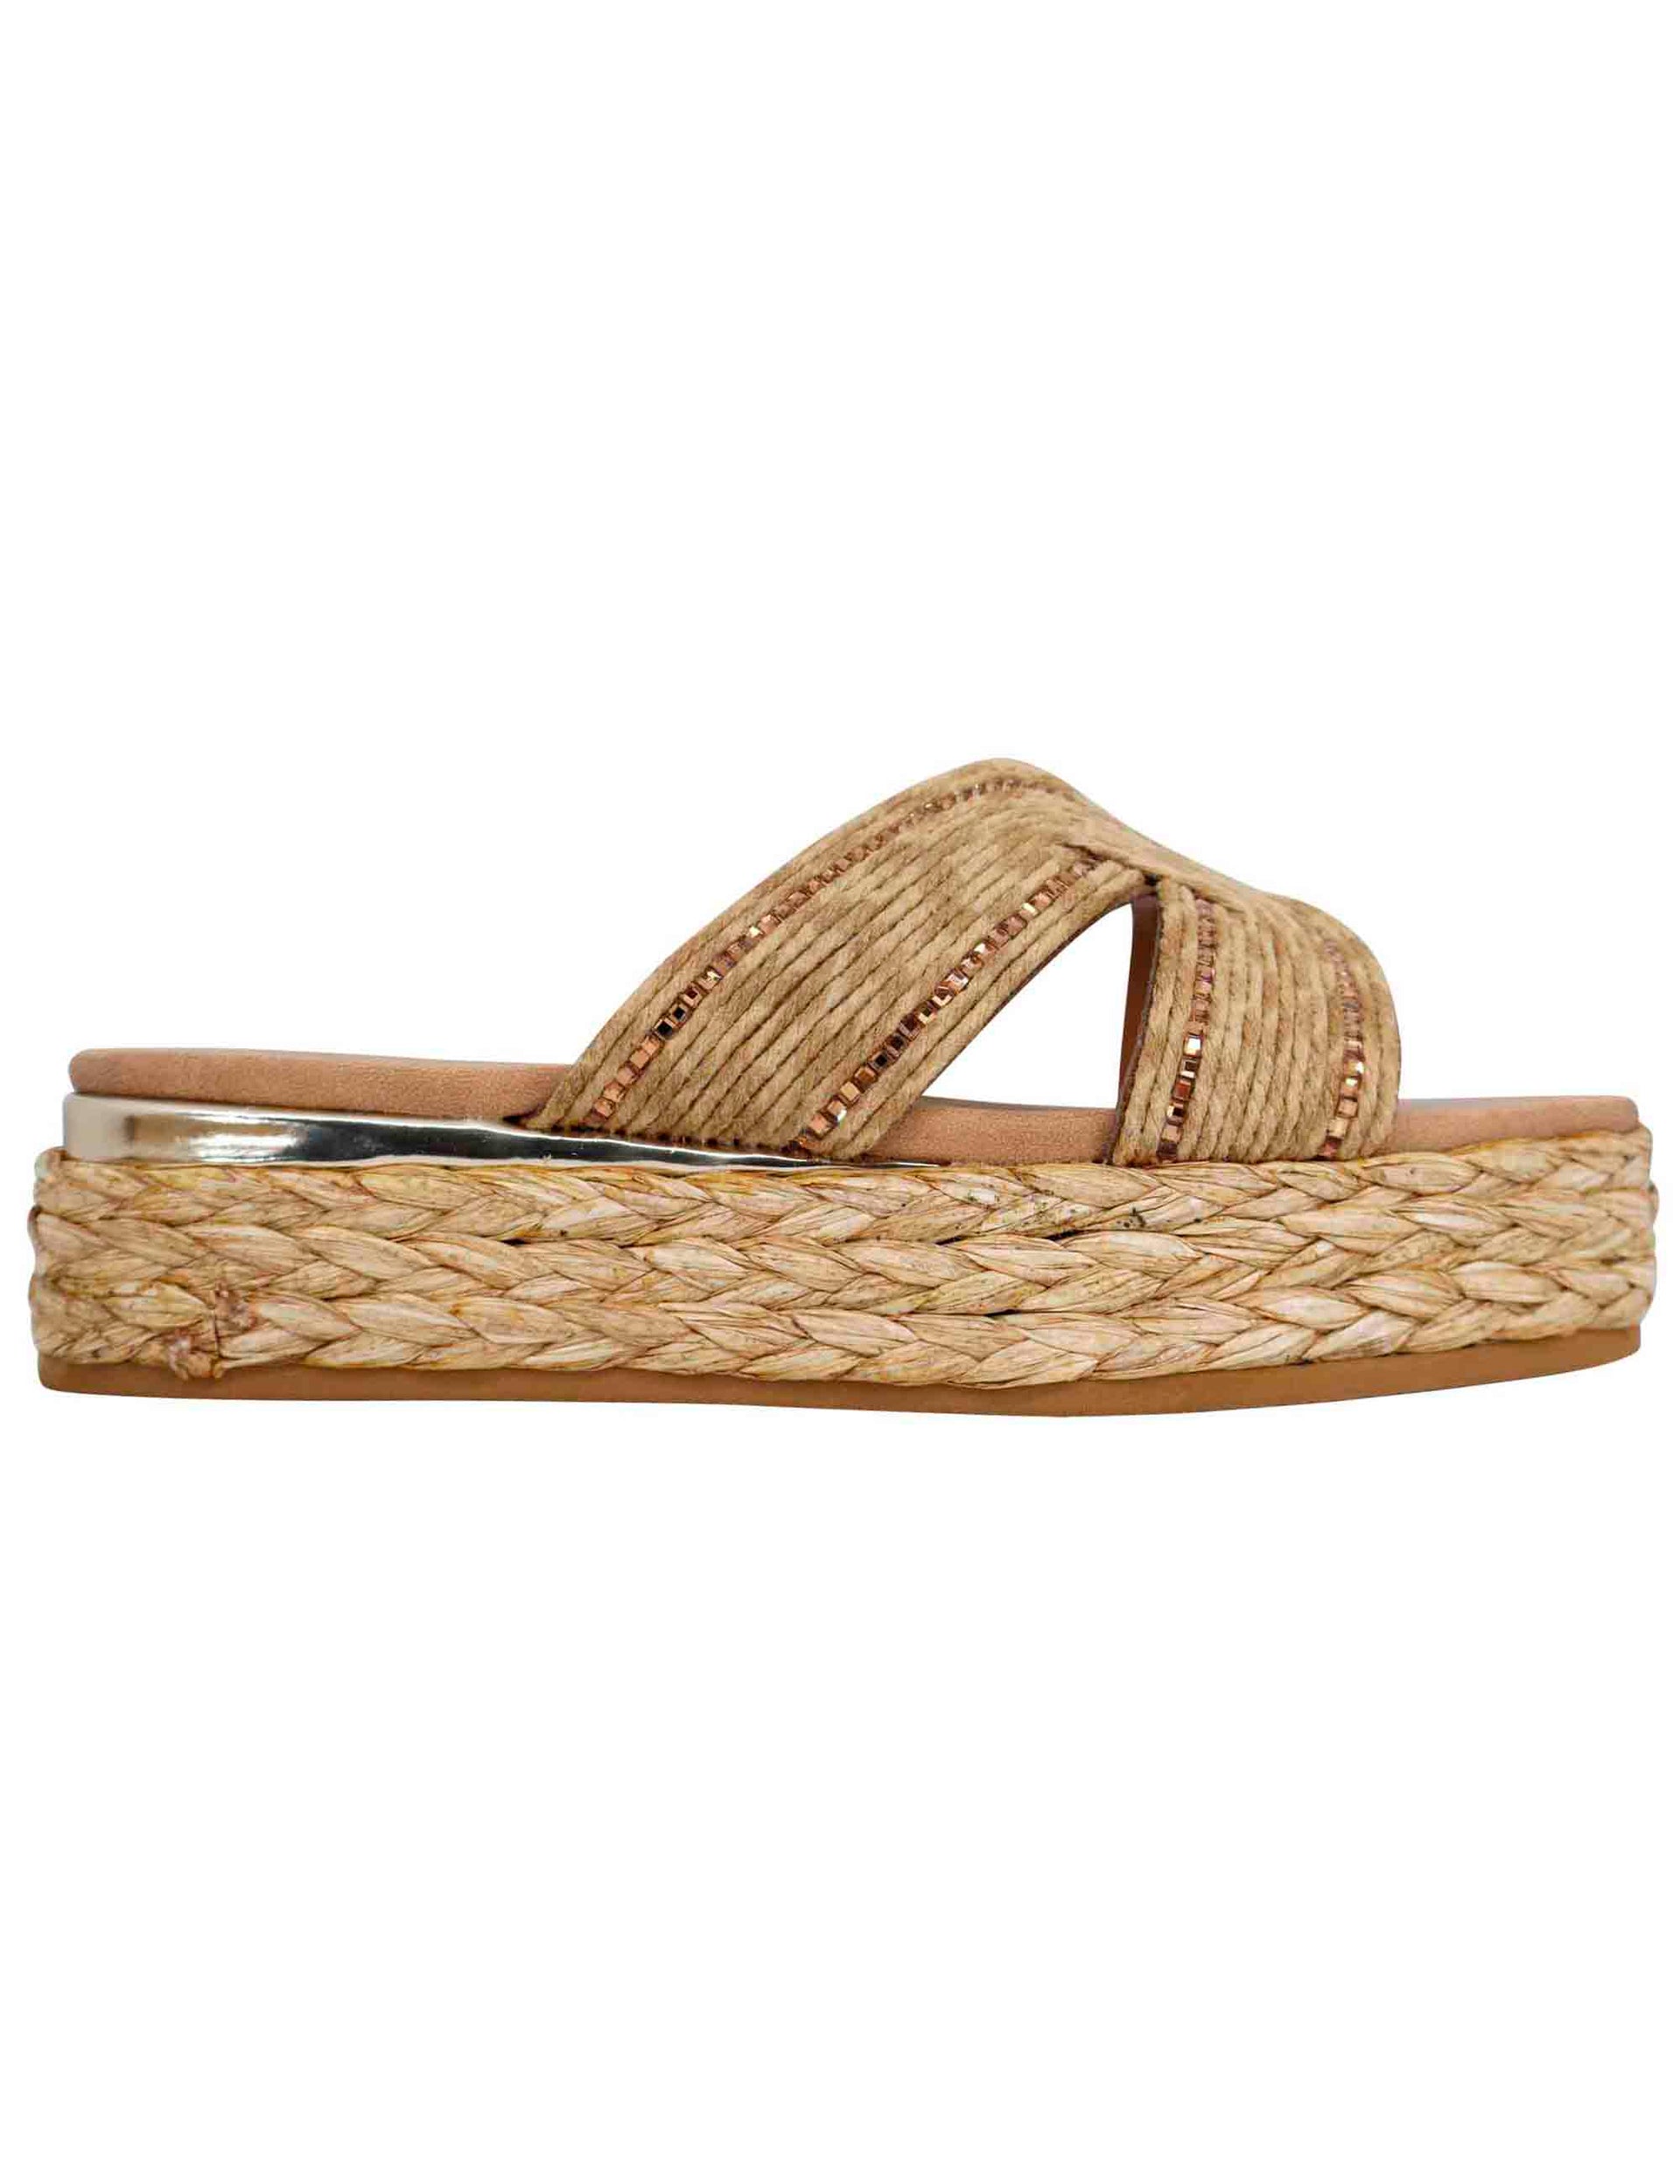 Women's beige rope sandals with gold trim